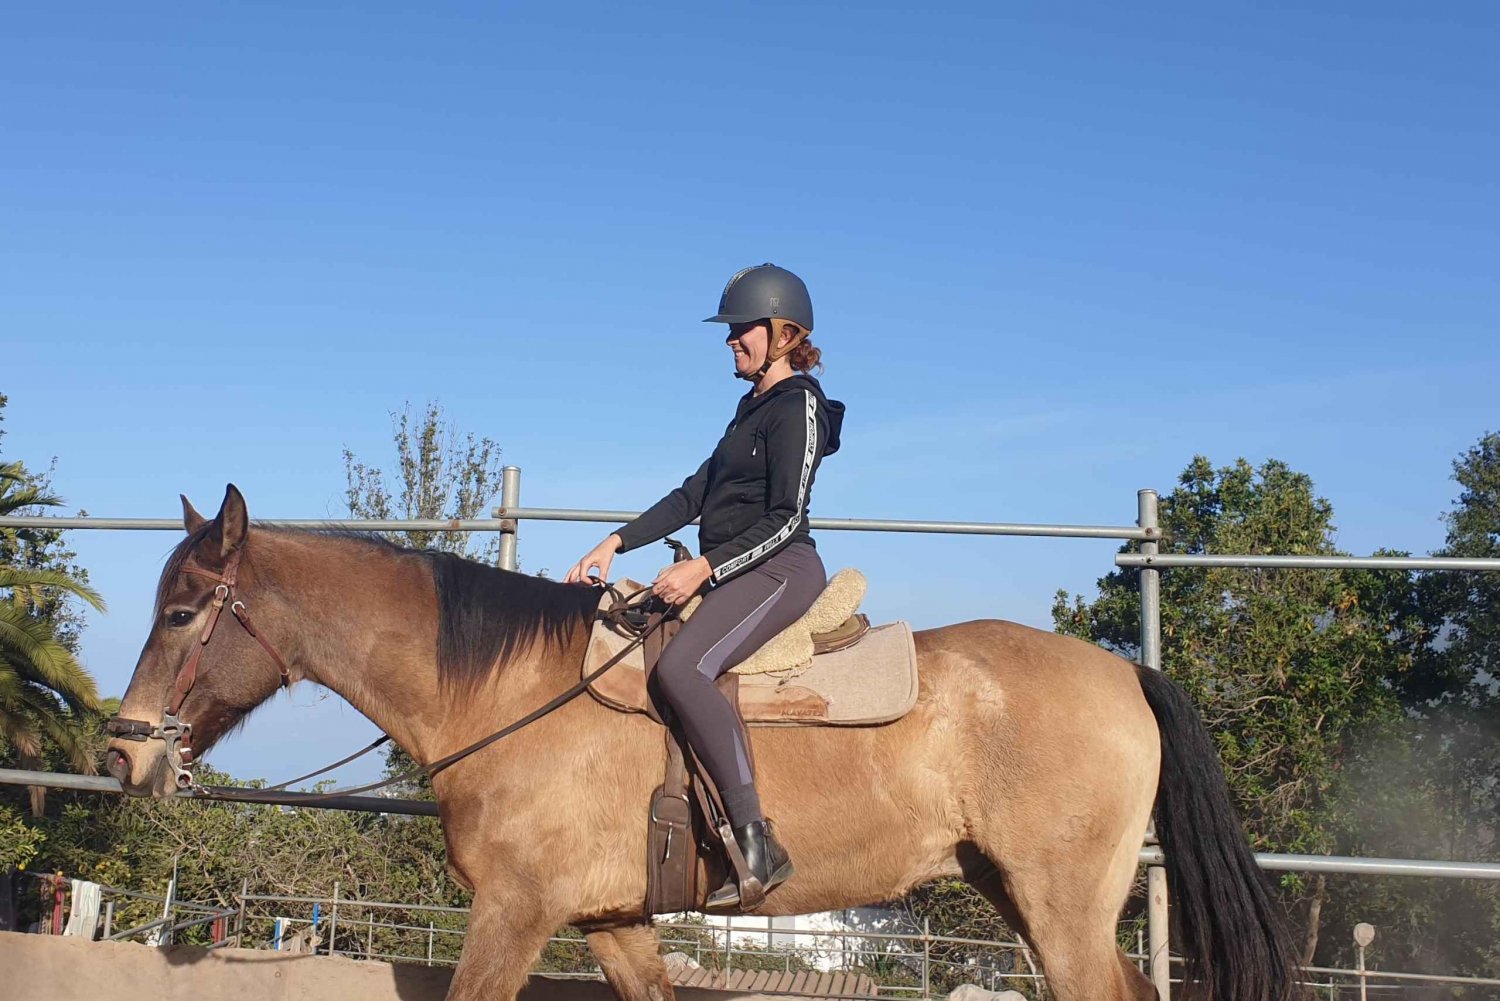 Riding lesson for beginners 1 hour, lots of information